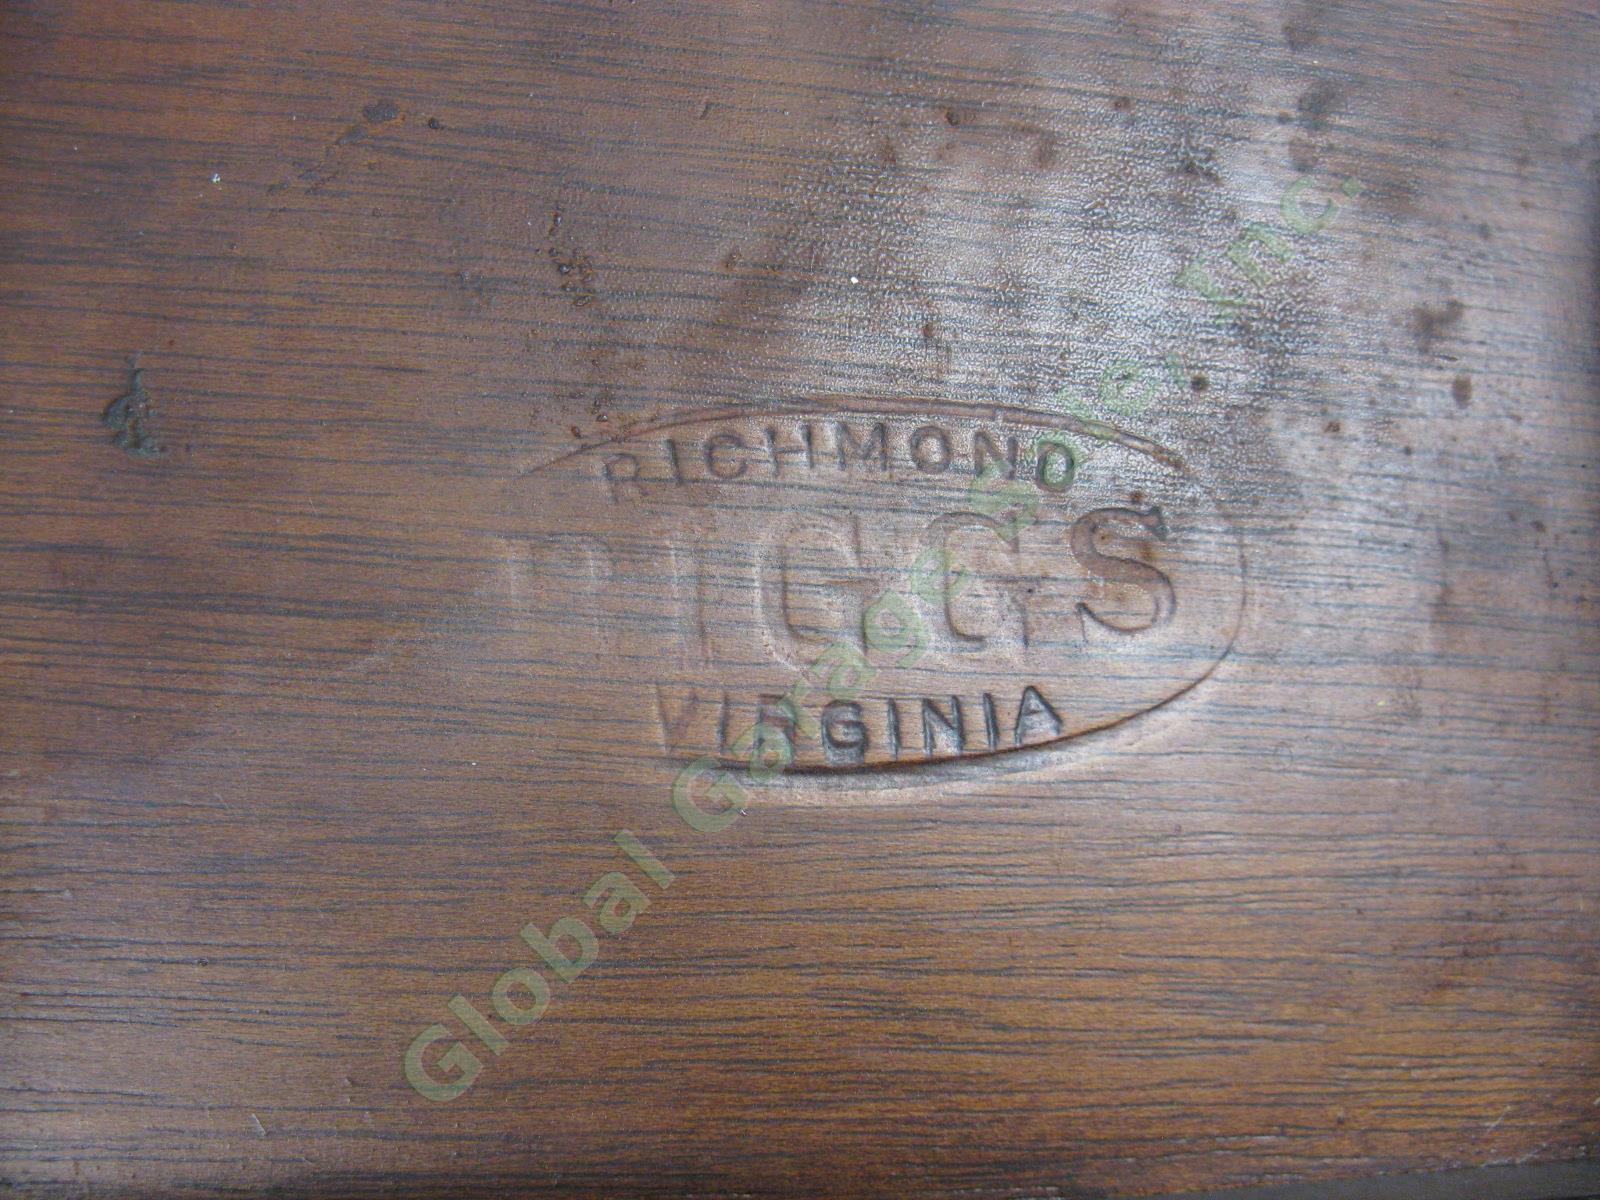 Vtg Biggs Furniture Virginia Mahogany Center Spindle Candle Stand Table 25" x15" 4